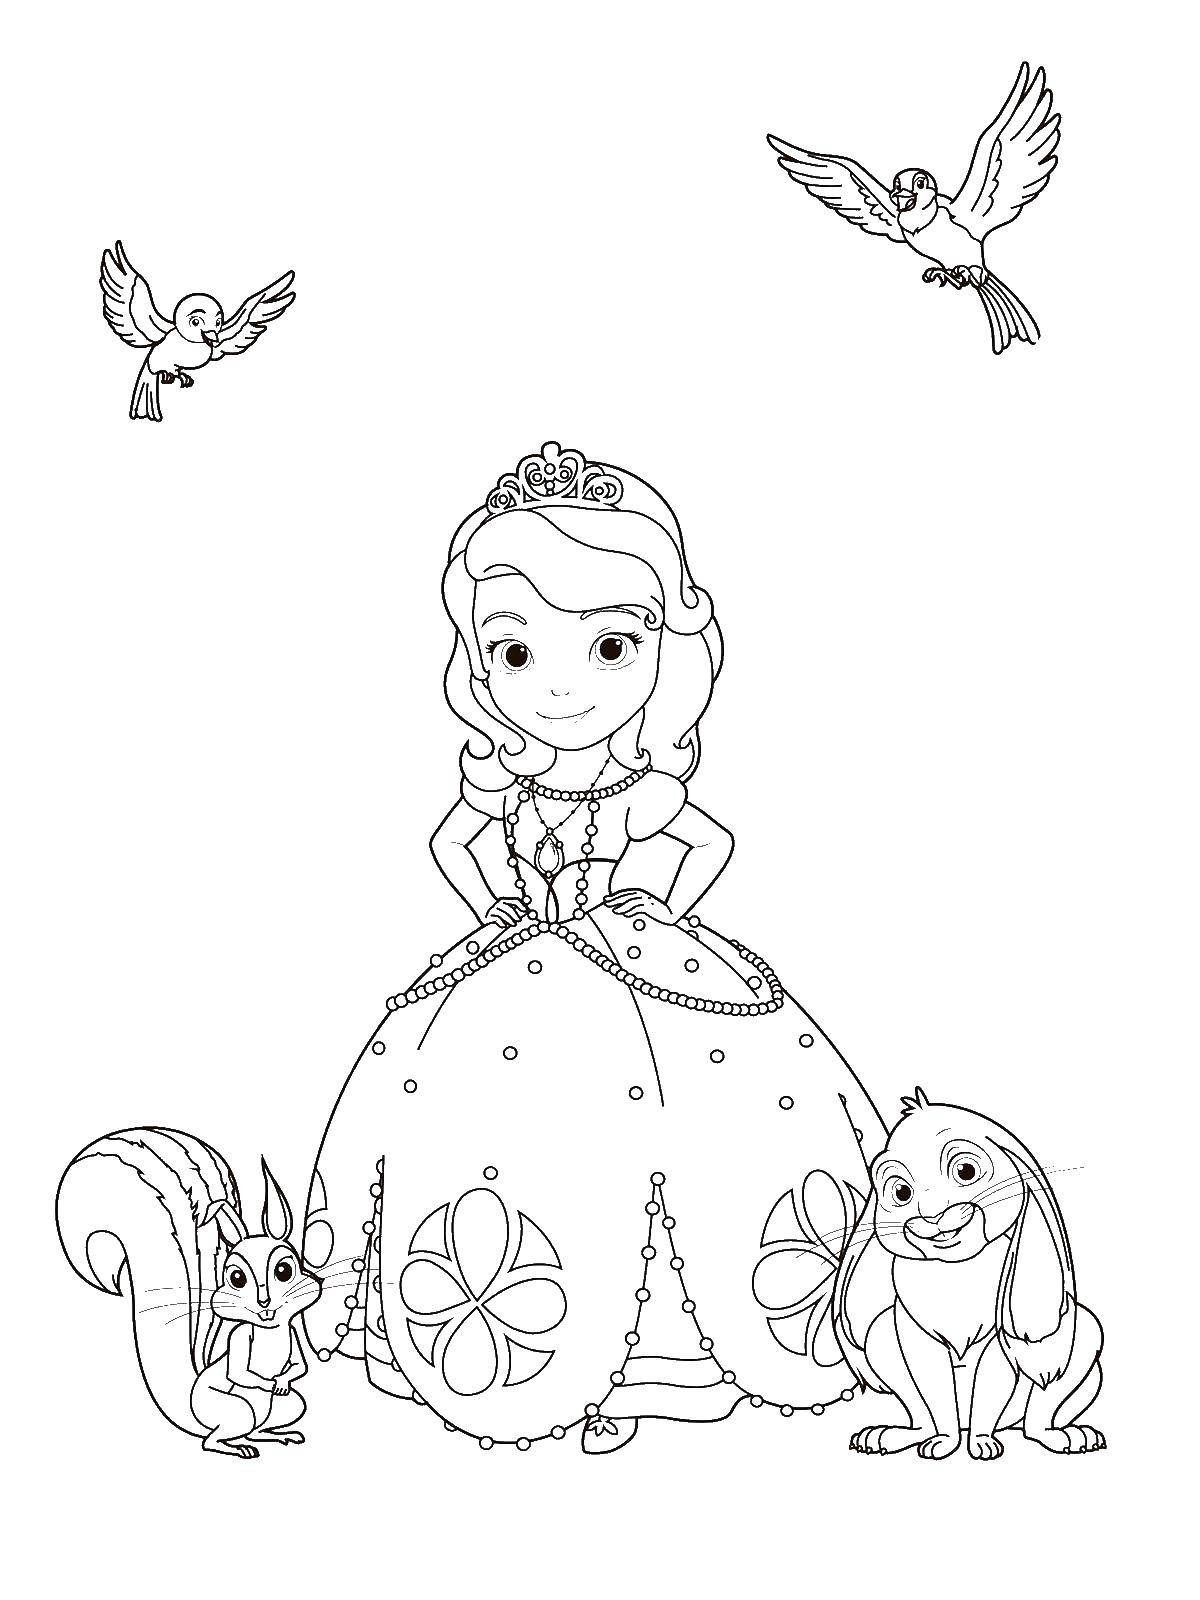 Coloring Princess Sofia and her friends. Category Princess Sophia. Tags:  Princess Sofia, squirrel, Nut.